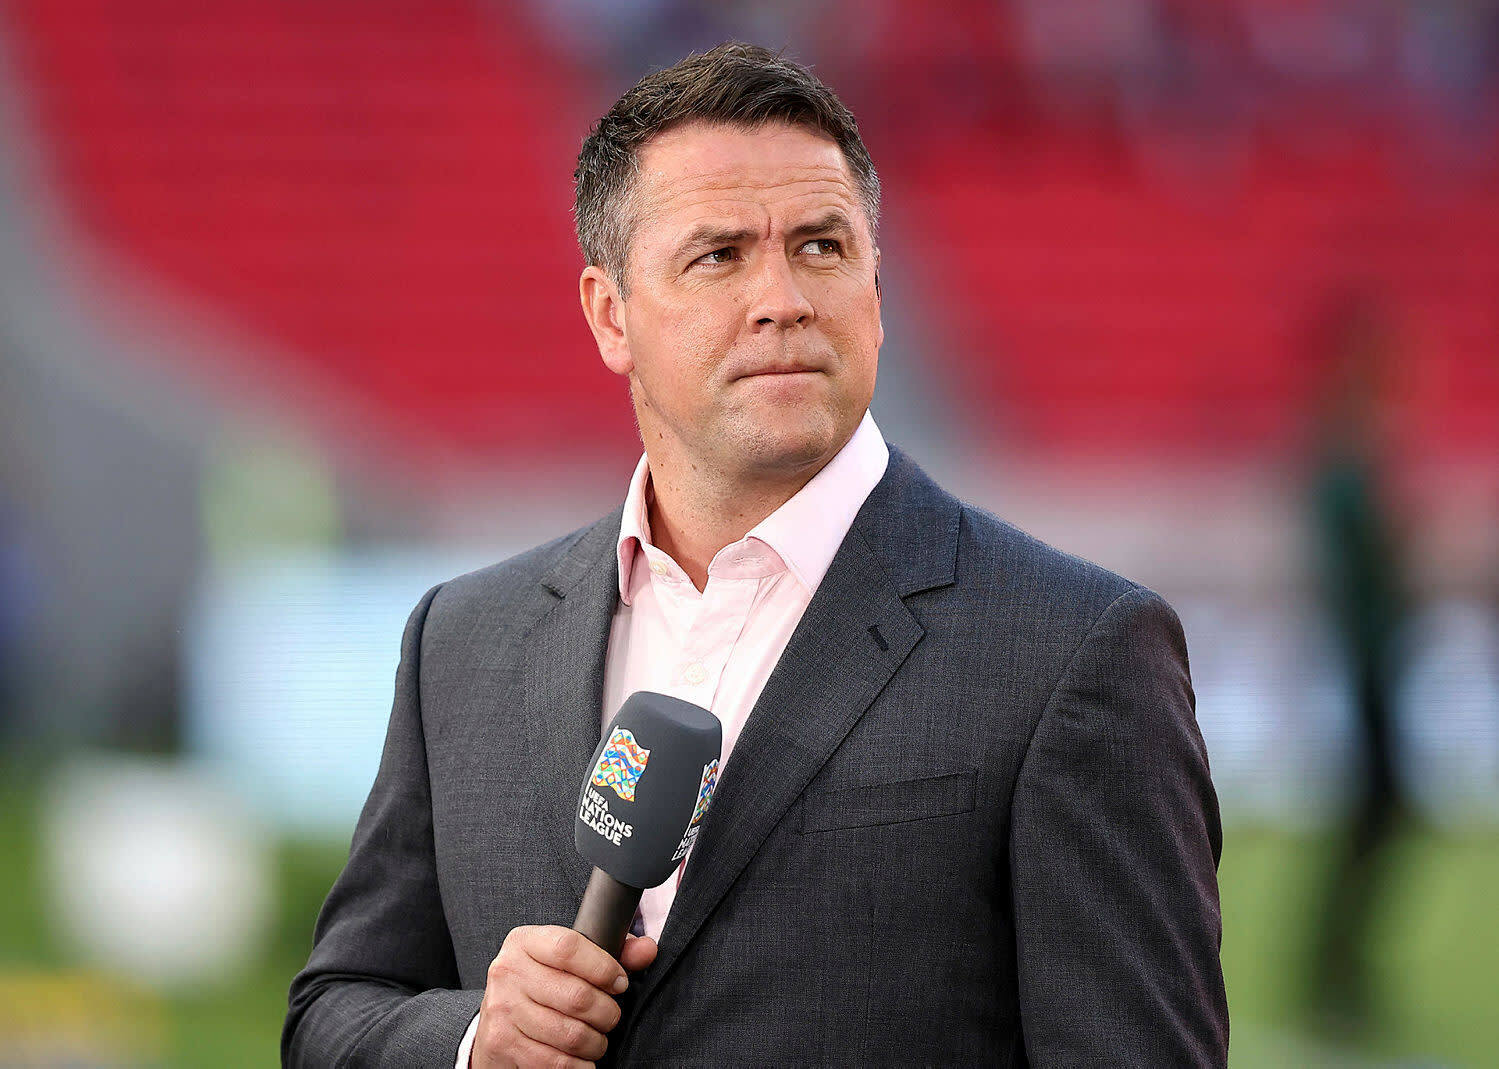 Michael Owen Believes That a 24-year-old Liverpool Player Has the Potential to Become a Top-class Player